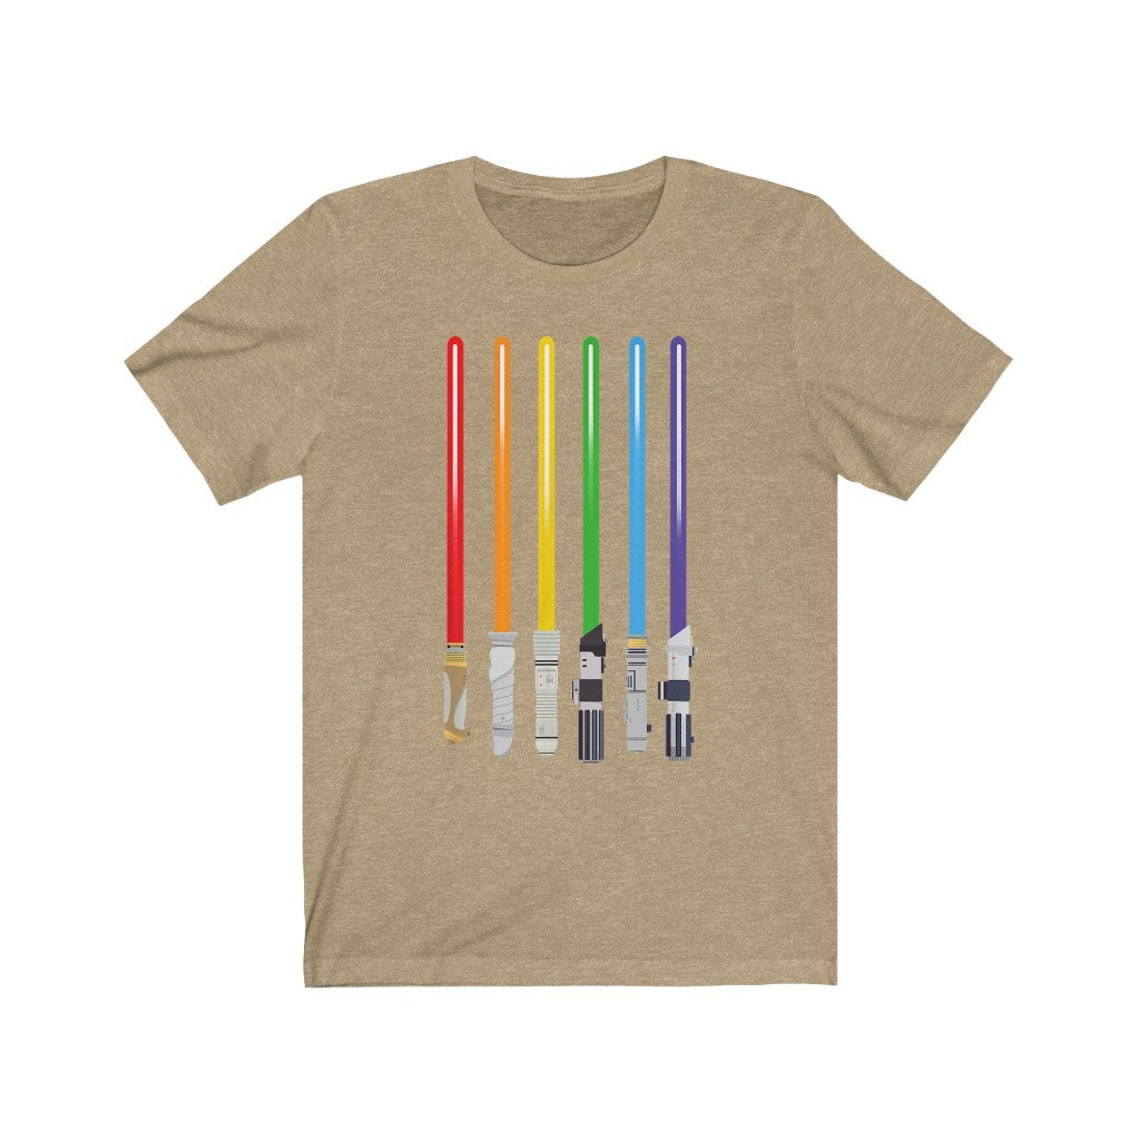 star wars gay pride shirts for sale